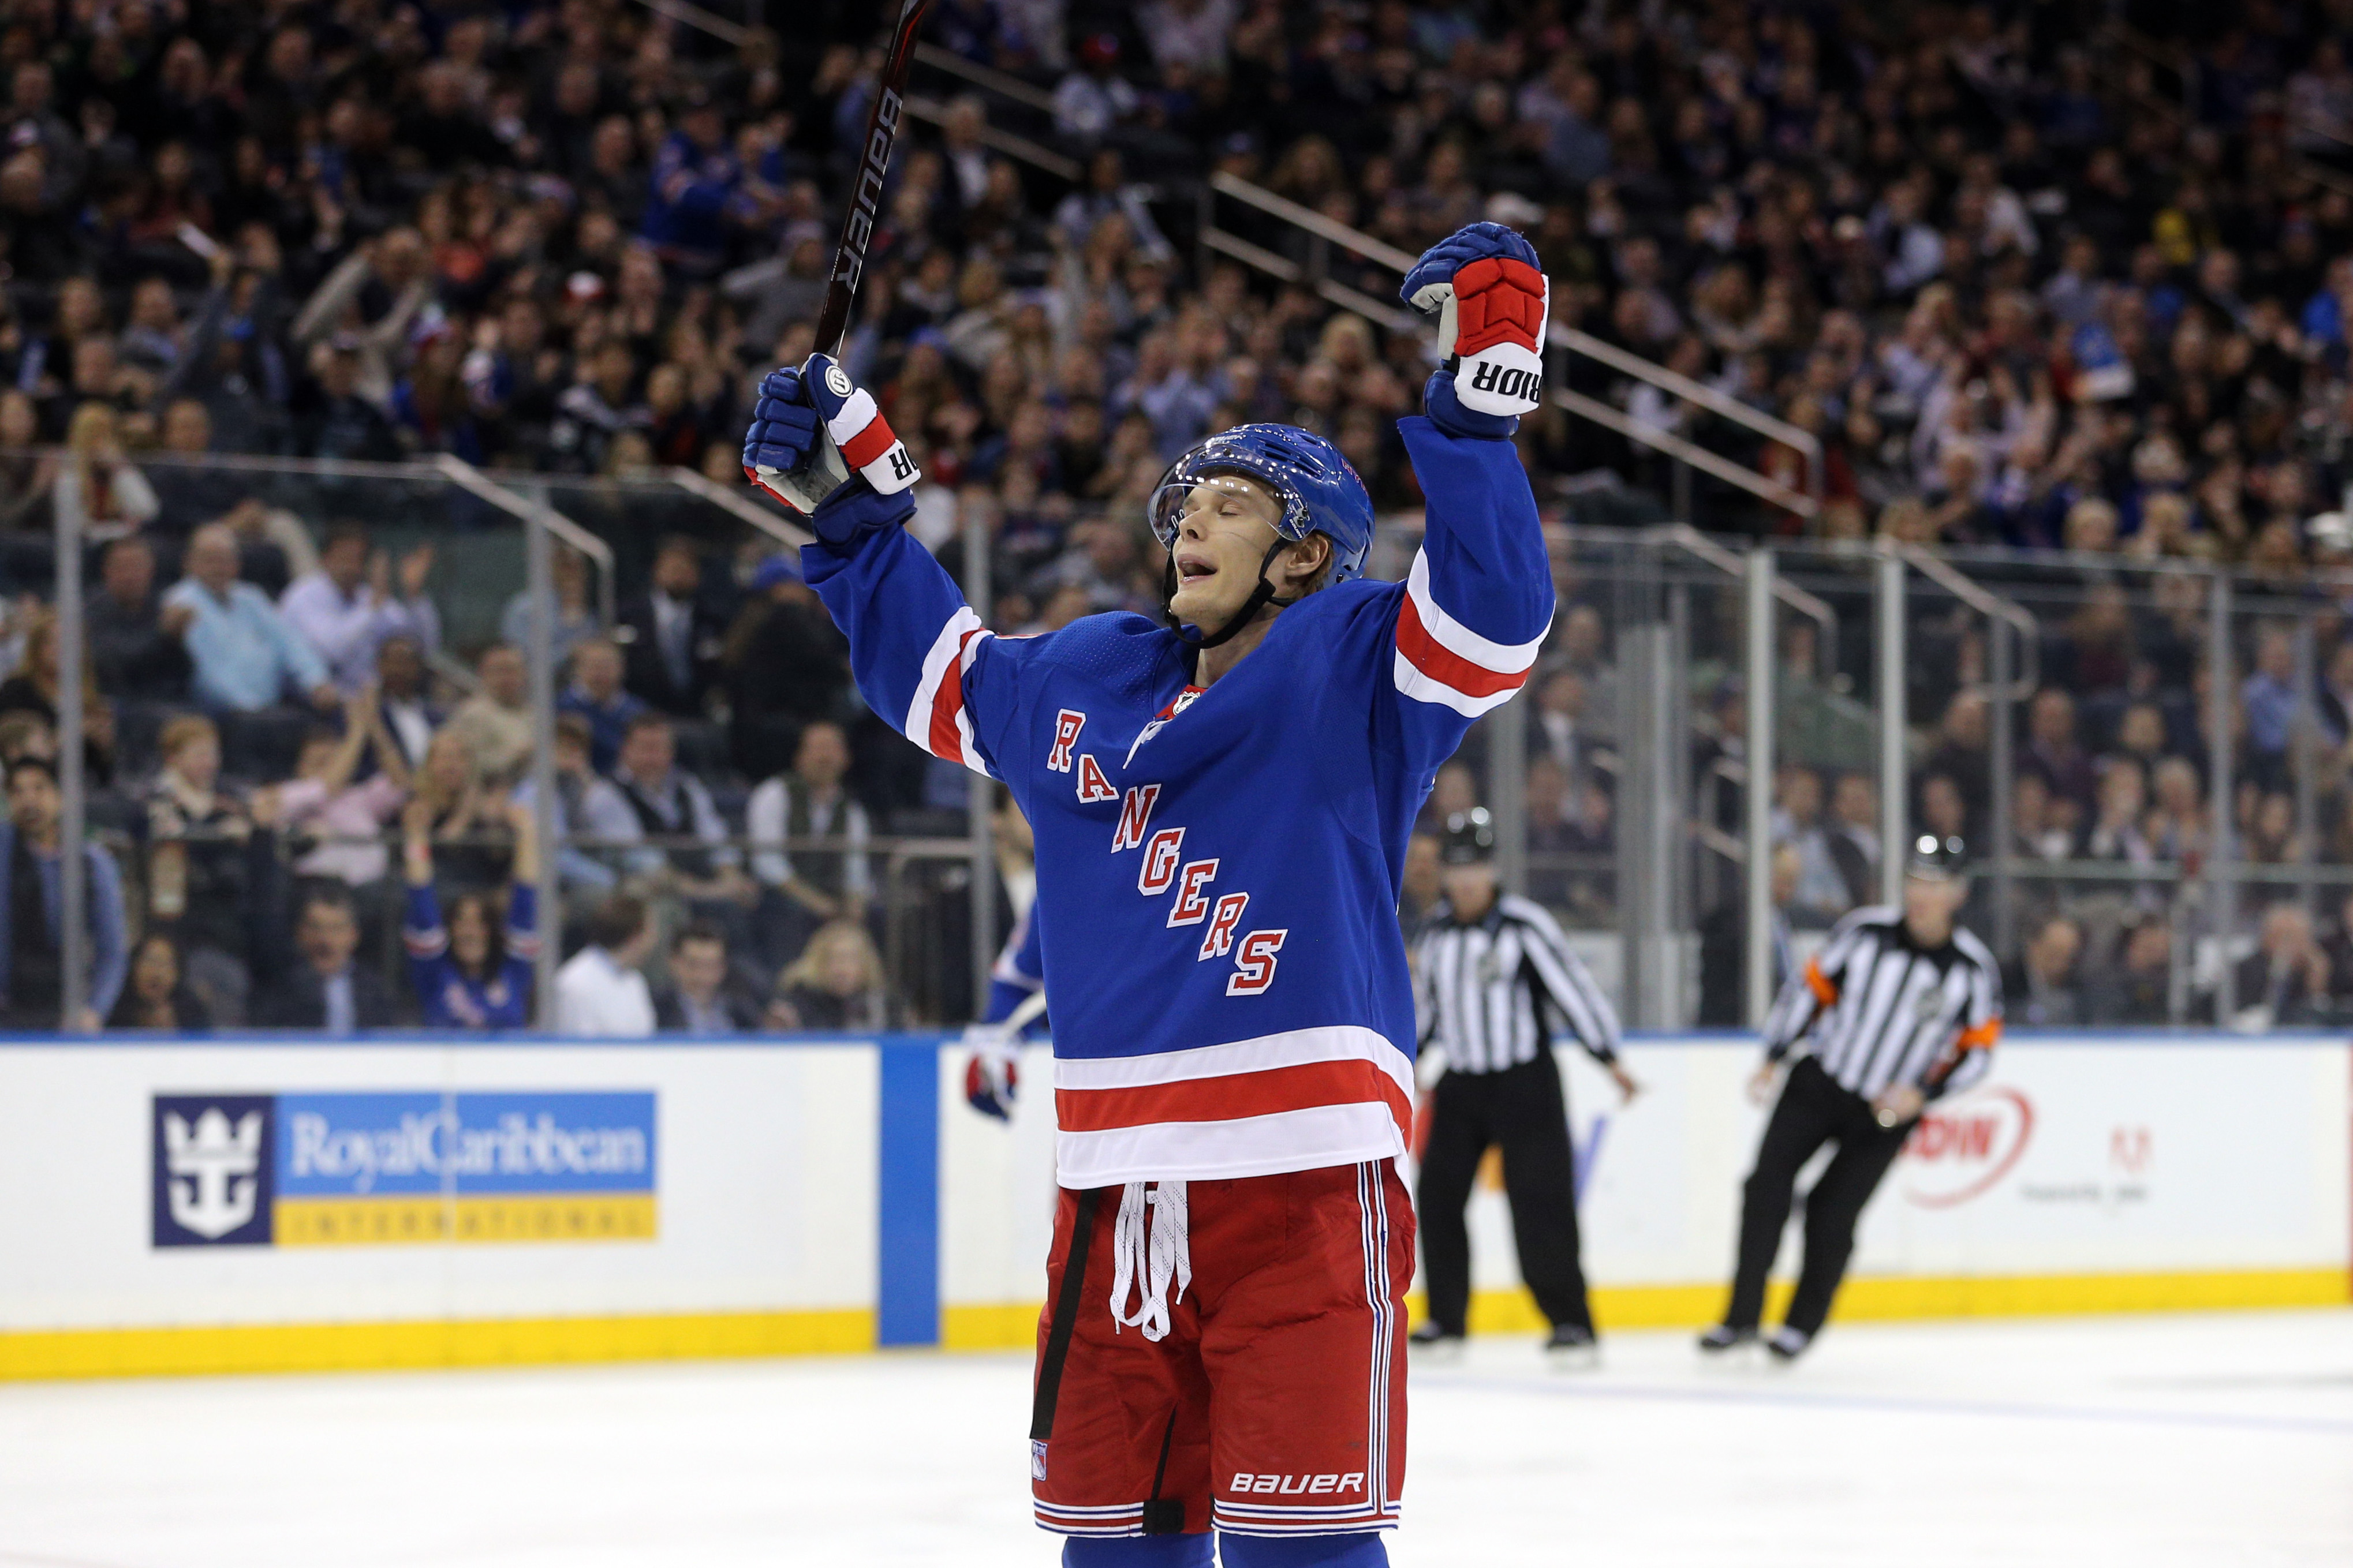 Mar 12, 2018; New York, NY, USA; New York Rangers center Vladislav Namestnikov (90) reacts after scoring a goal against the Carolina Hurricanes during the second period at Madison Square Garden. Mandatory Credit: Brad Penner-USA TODAY Sports